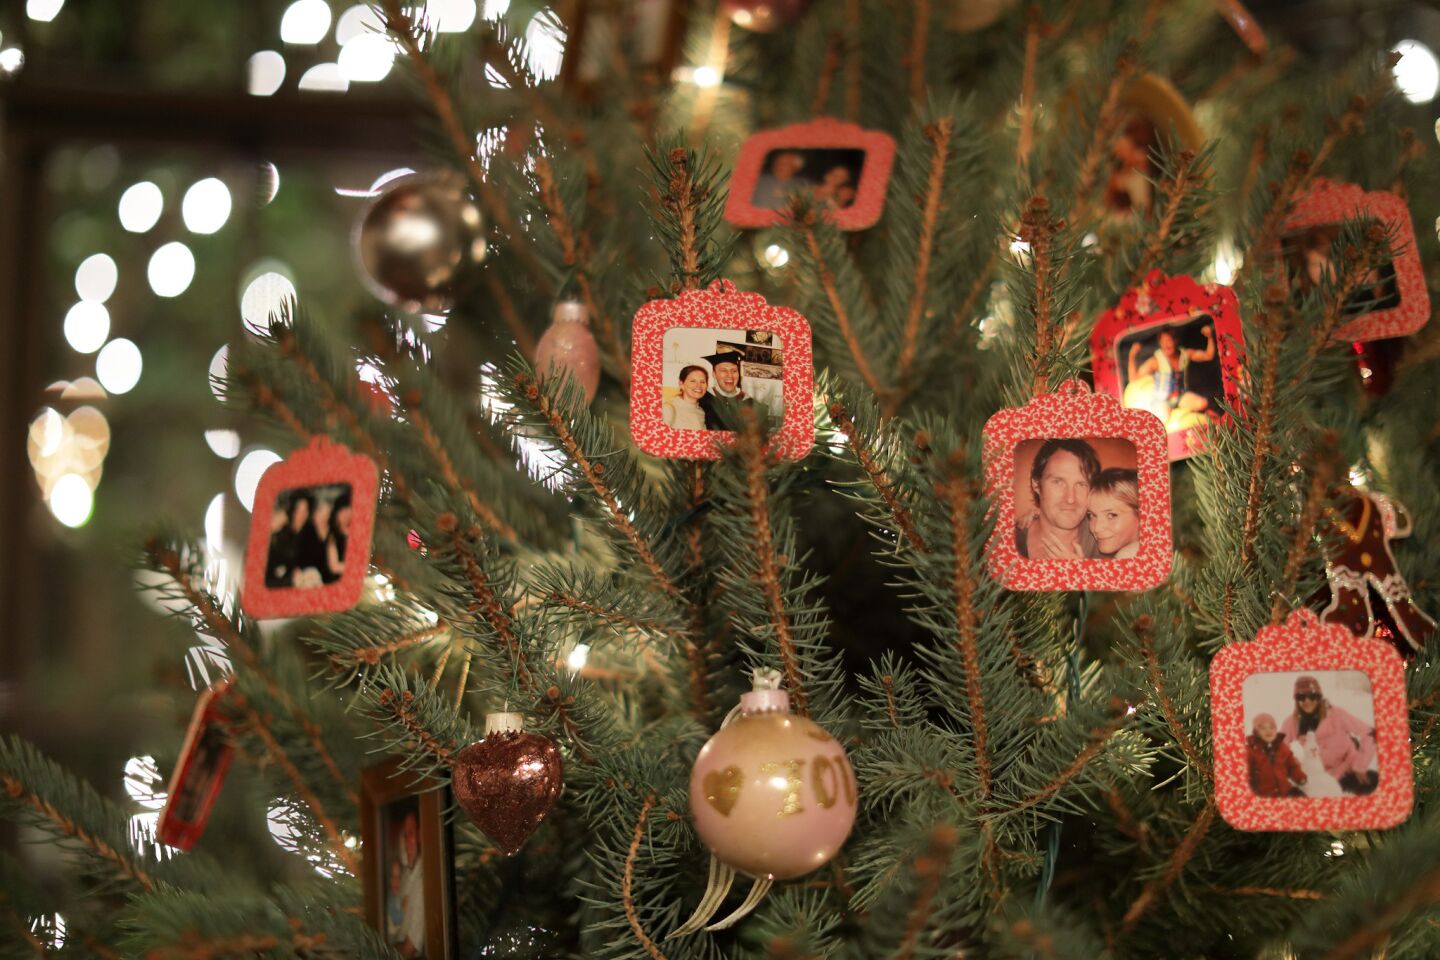 The Christmas tree is decorated with photos of four generations of family.